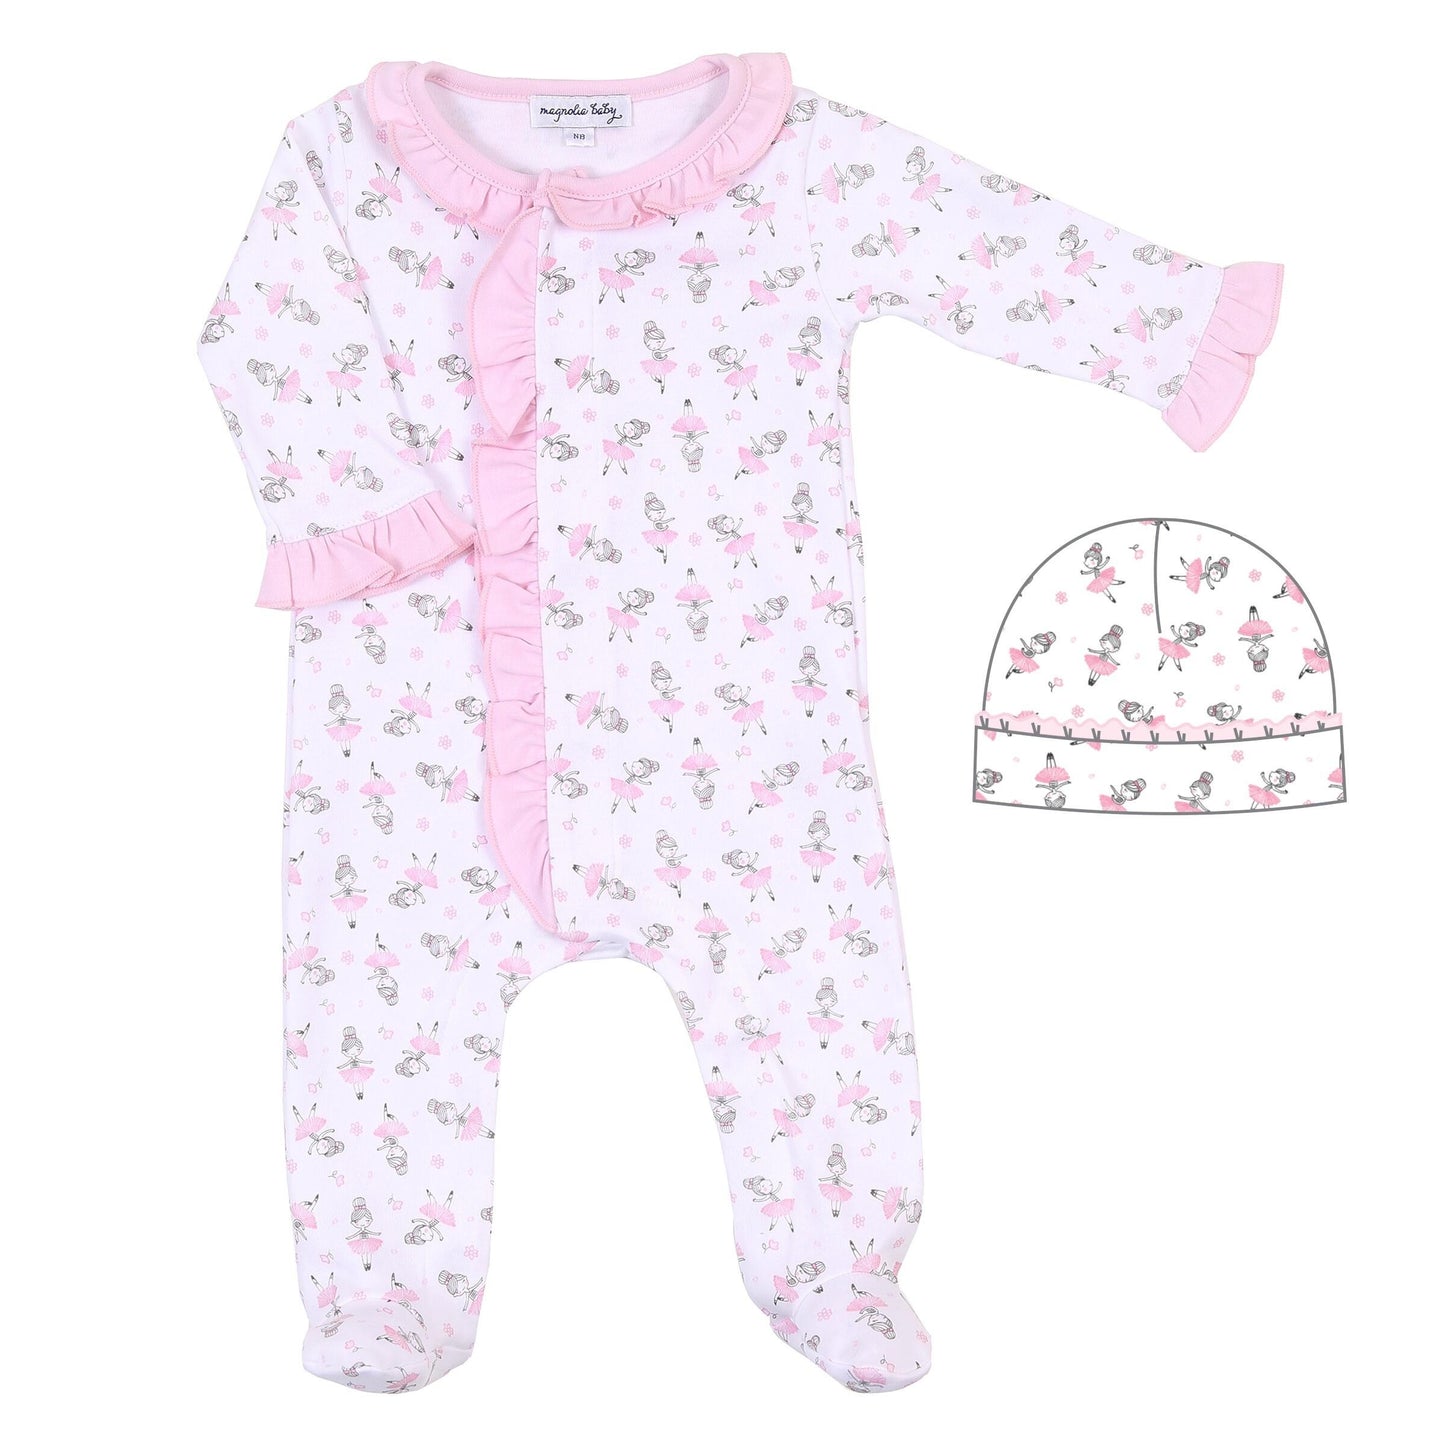 Prima Ballerina Pink Printed Ruffle Front Footie and Hat Set